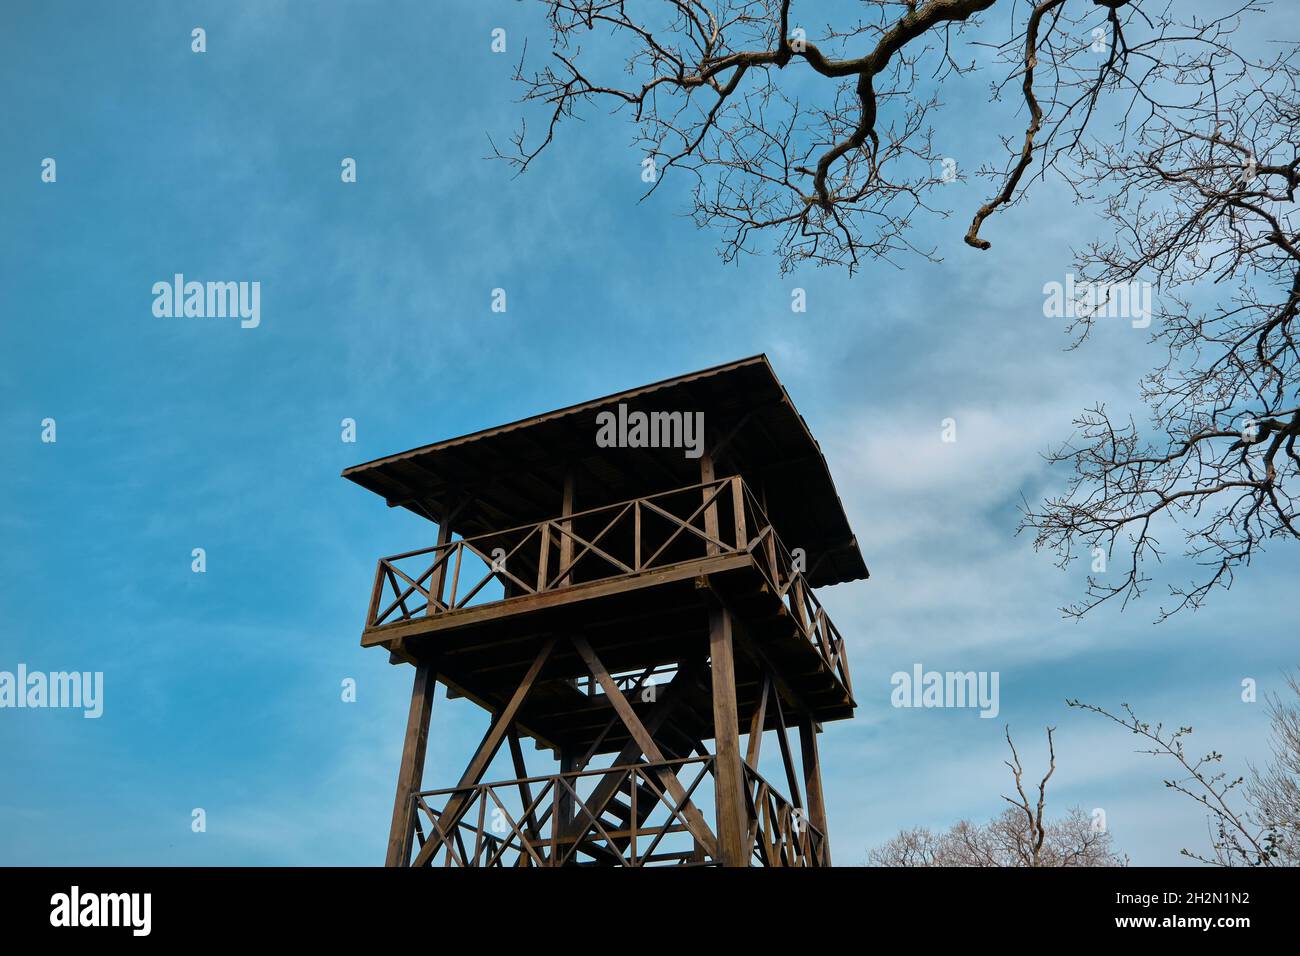 A wooden house made for bird watching in Karacabey floodplain and forest with magnificent blue sky background Stock Photo